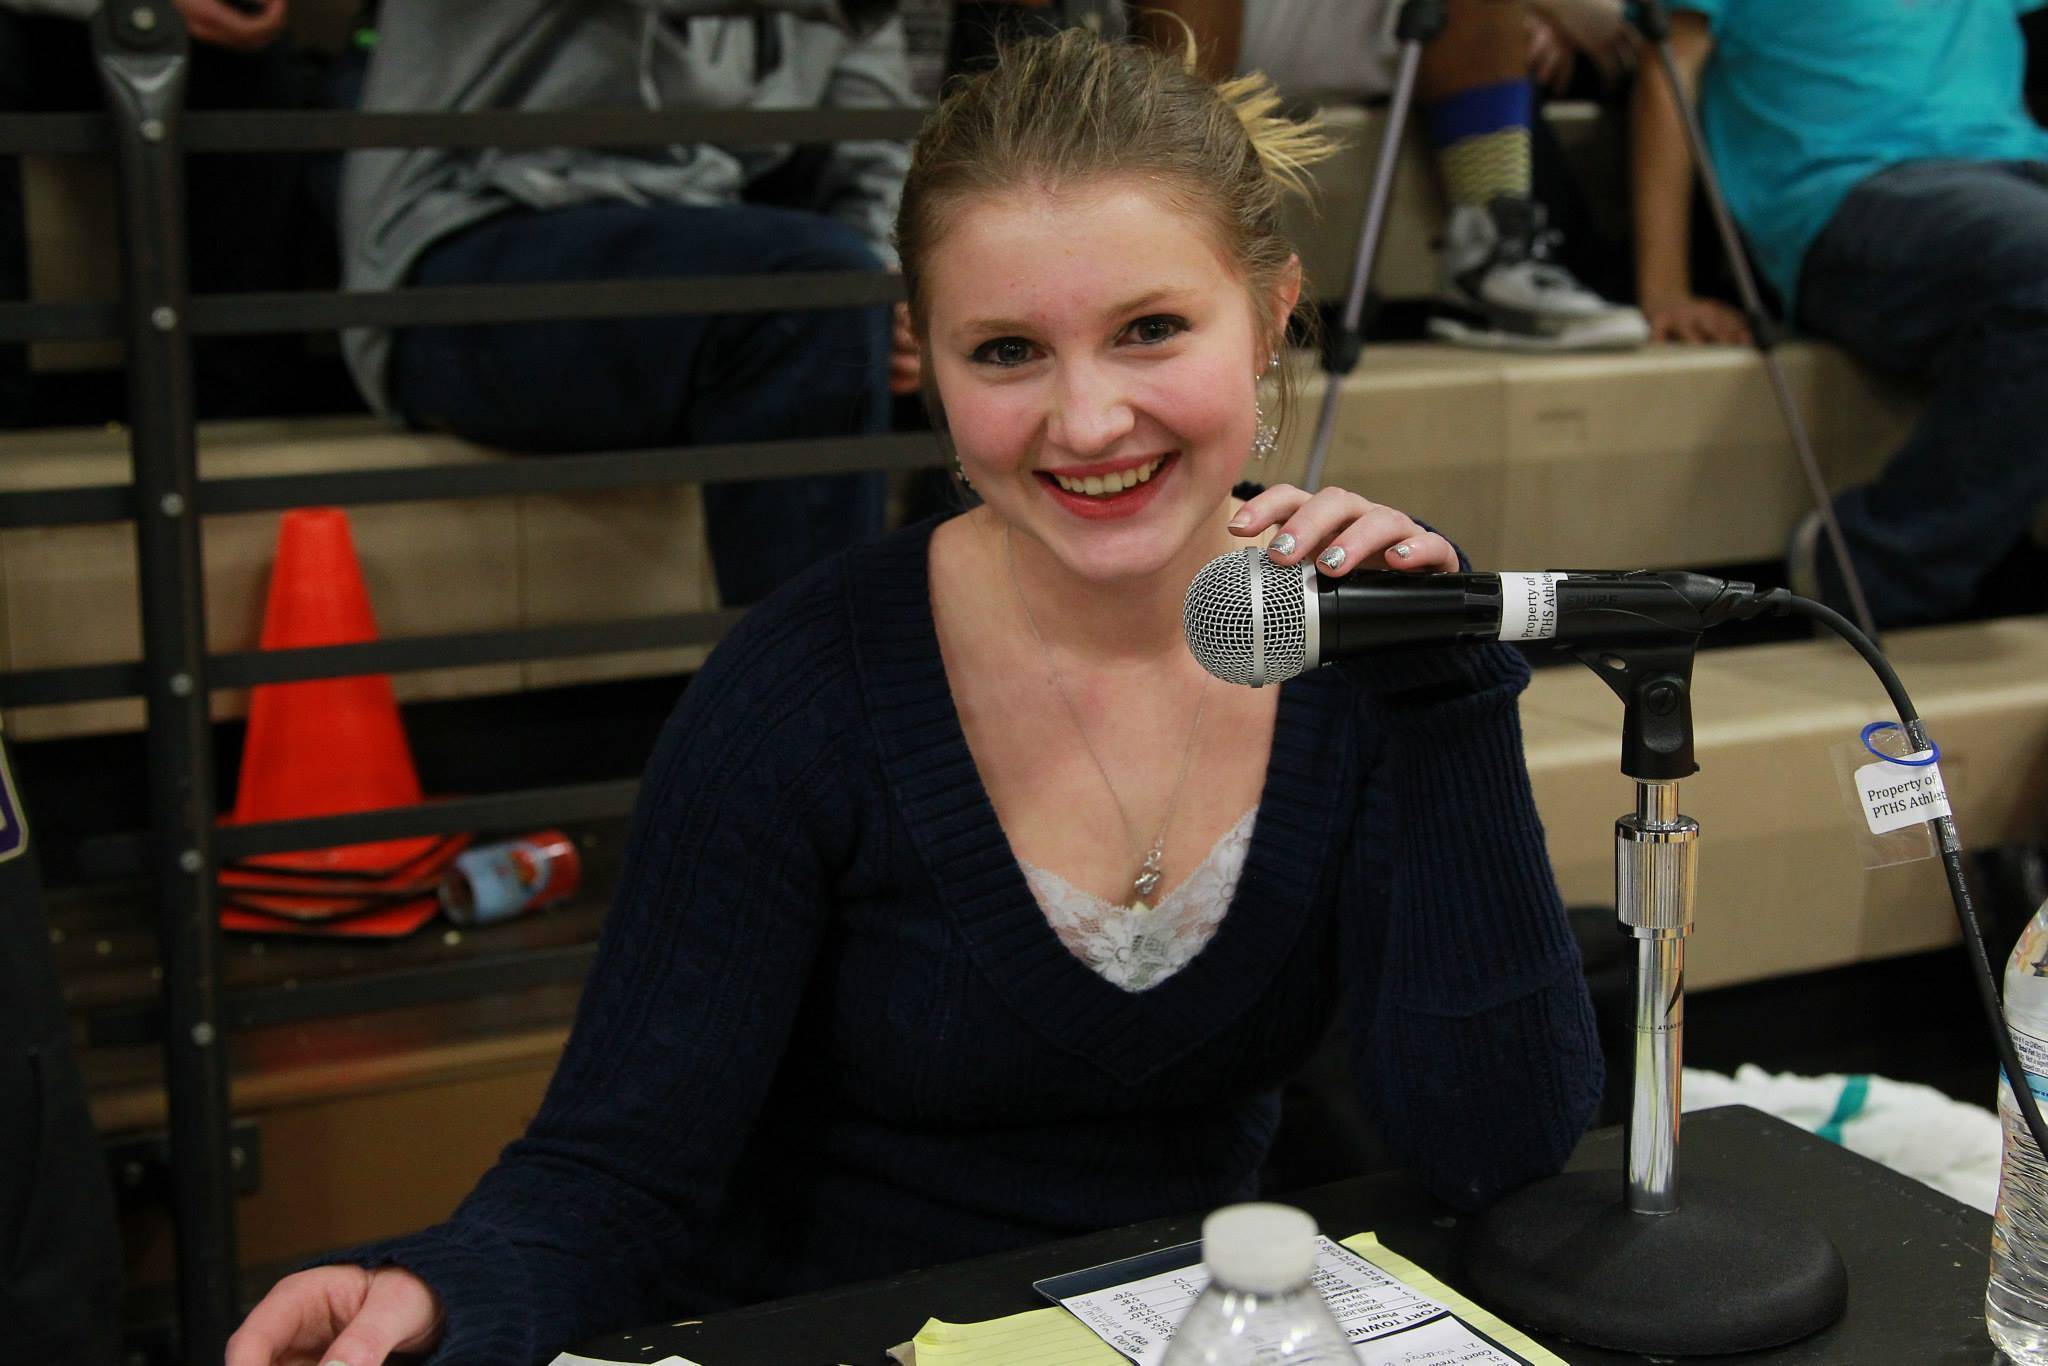 Contributed photo/Friday Harbor Tiny Radio                                Friday Harbor Tiny Radio’s &lt;a href="http://www.sanjuanjournal.com/sports/friday-harbor-tiny-radio-adds-new-broadcaster-to-line-up/" target="_blank"&gt;Kaila Olin&lt;/a&gt;.